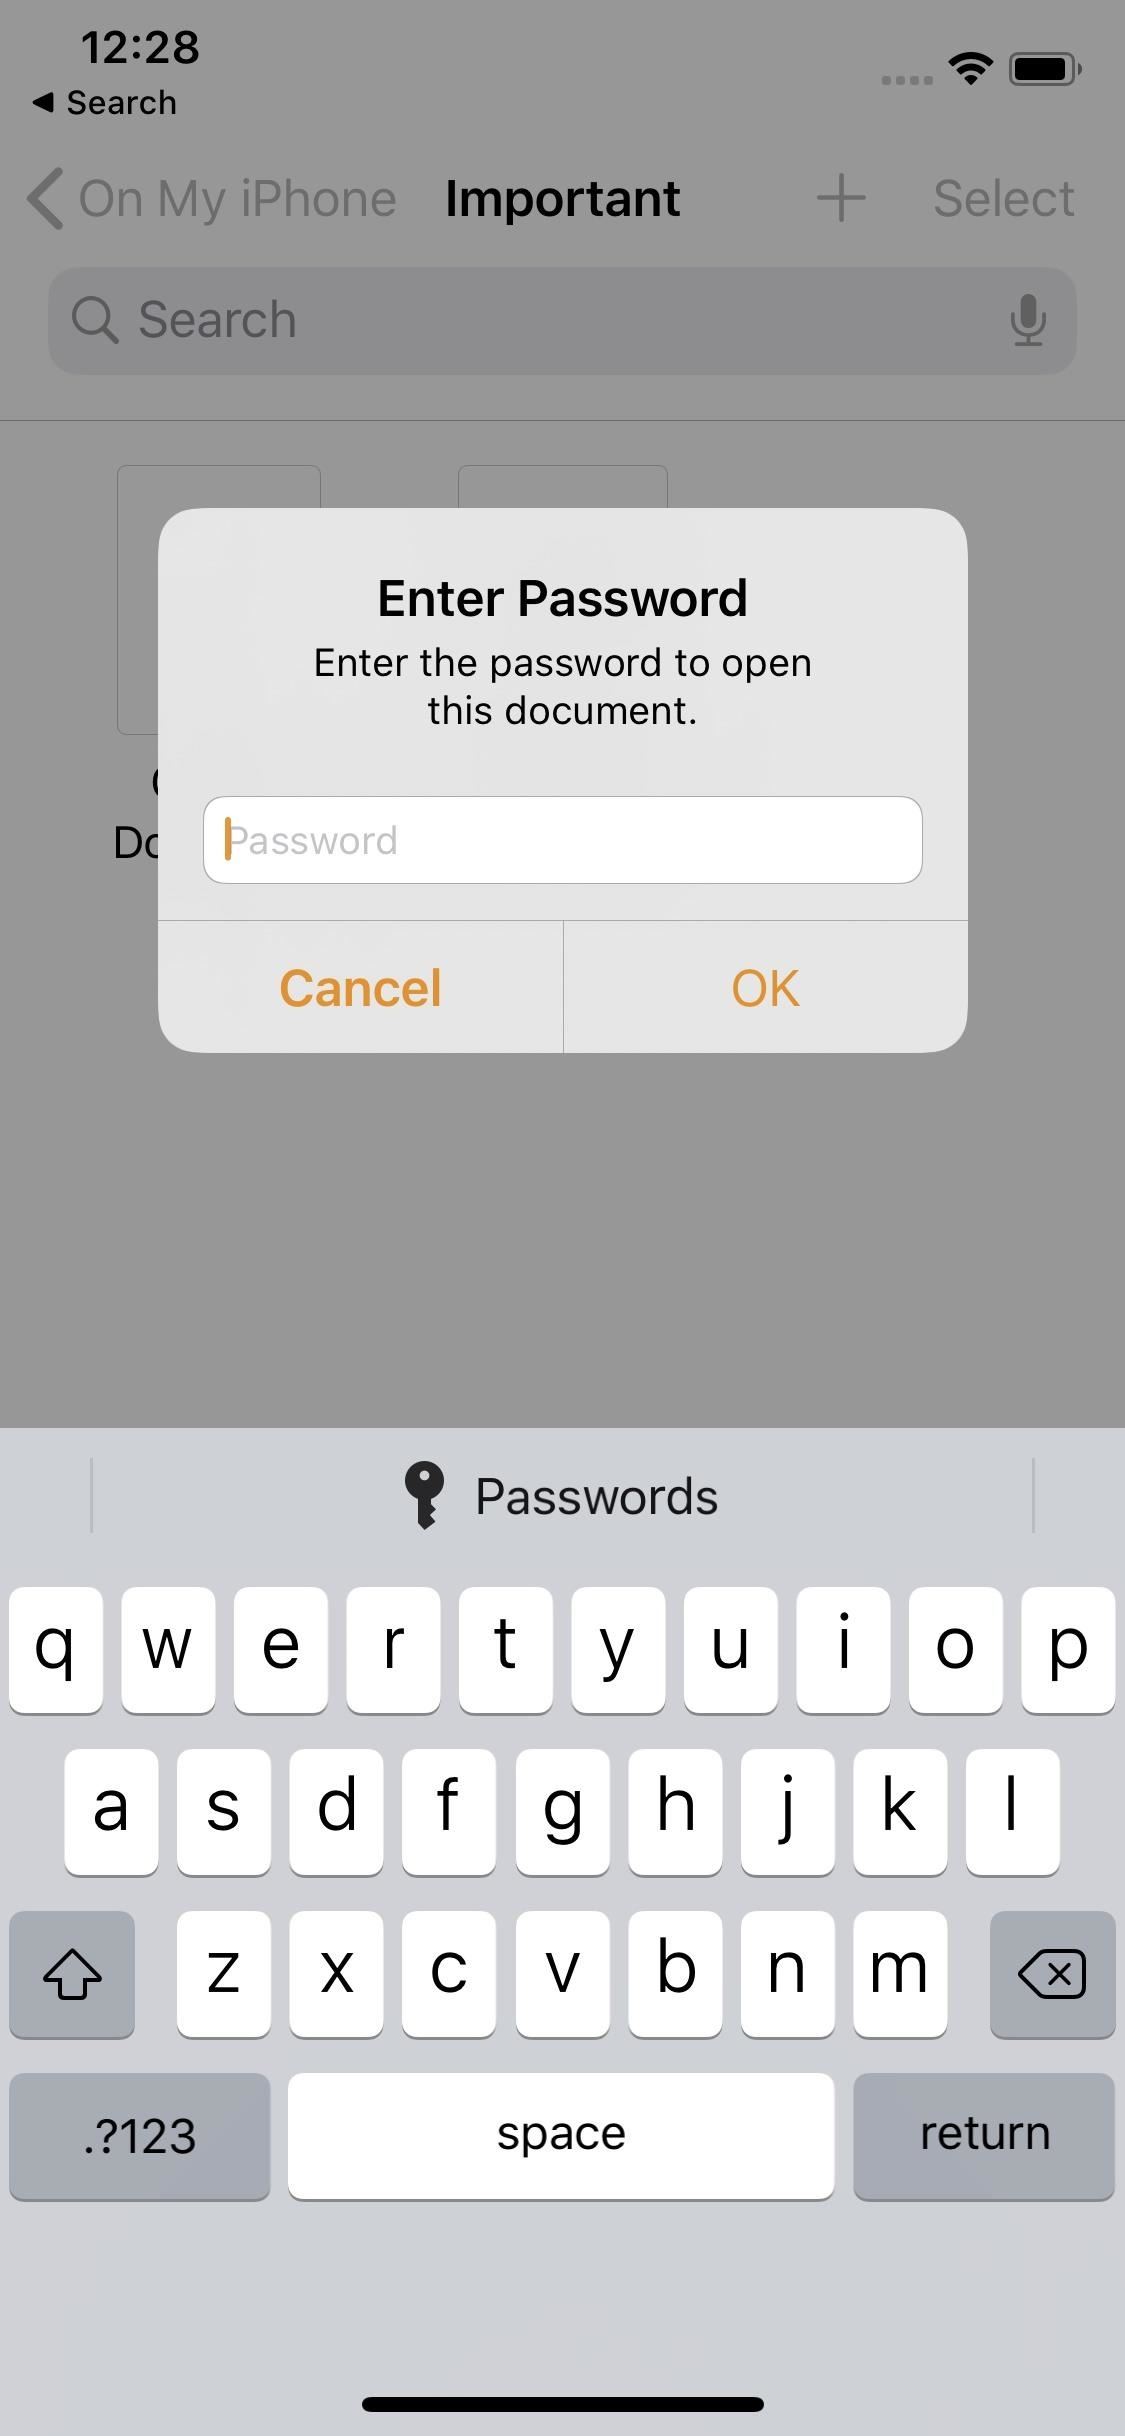 Password-Protect Your Pages Documents So Only You & Allowed Collaborators Can Access Them